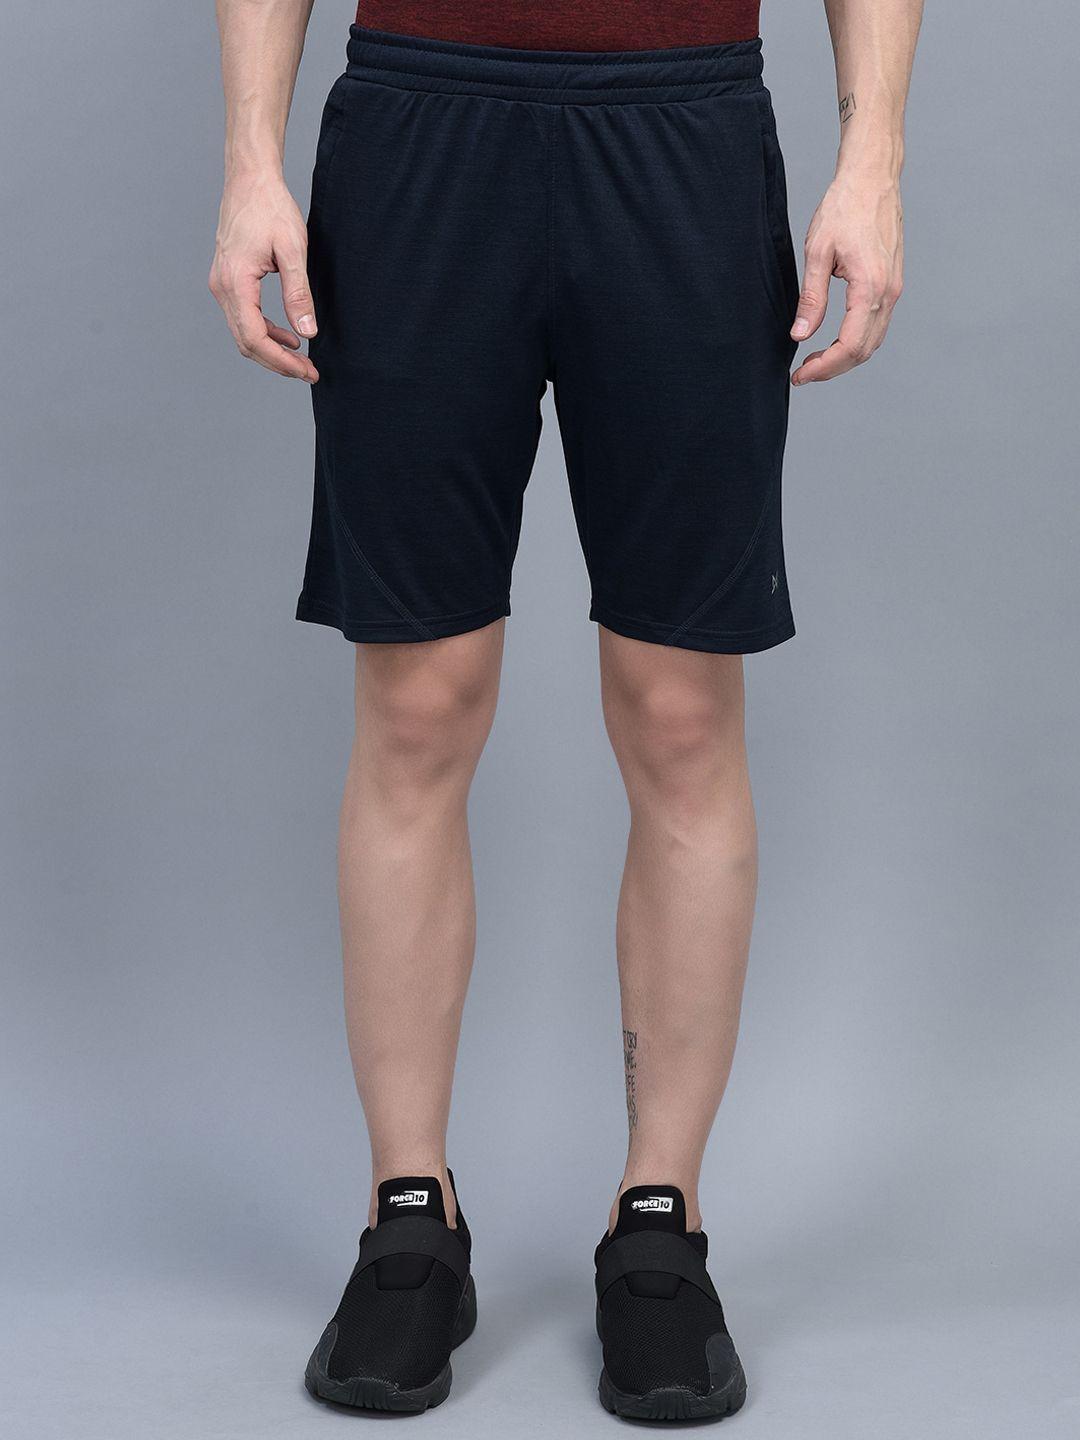 force nxt men outdoor sports shorts